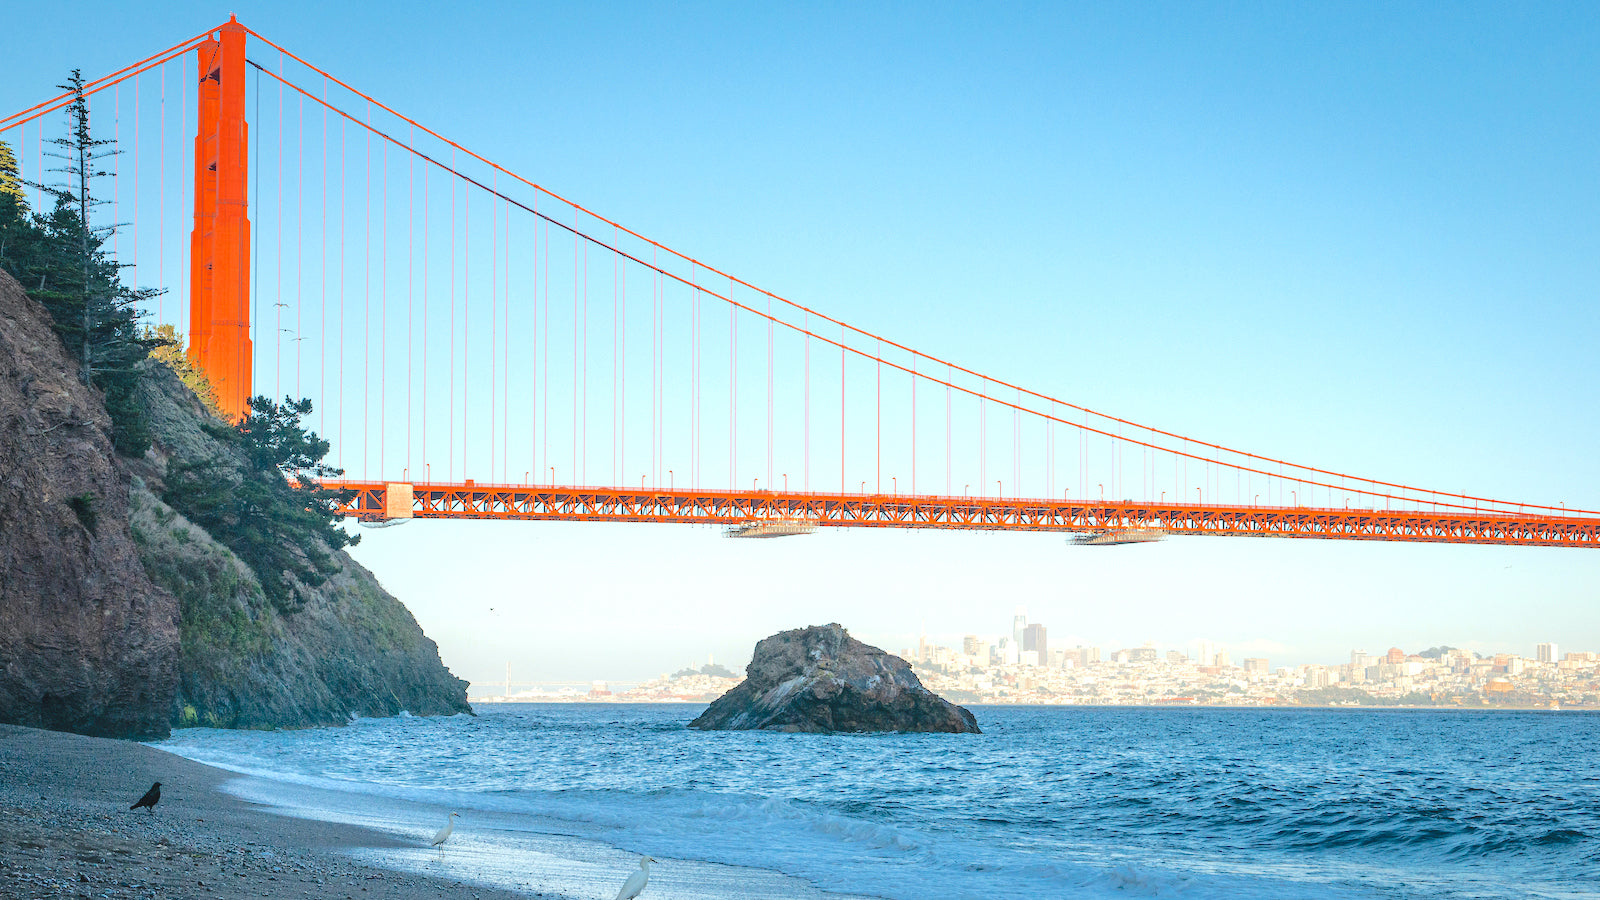 A dramatic view of the Golden Gate Bridge from Kirby Cove in the Marin Headlands on a sunny day